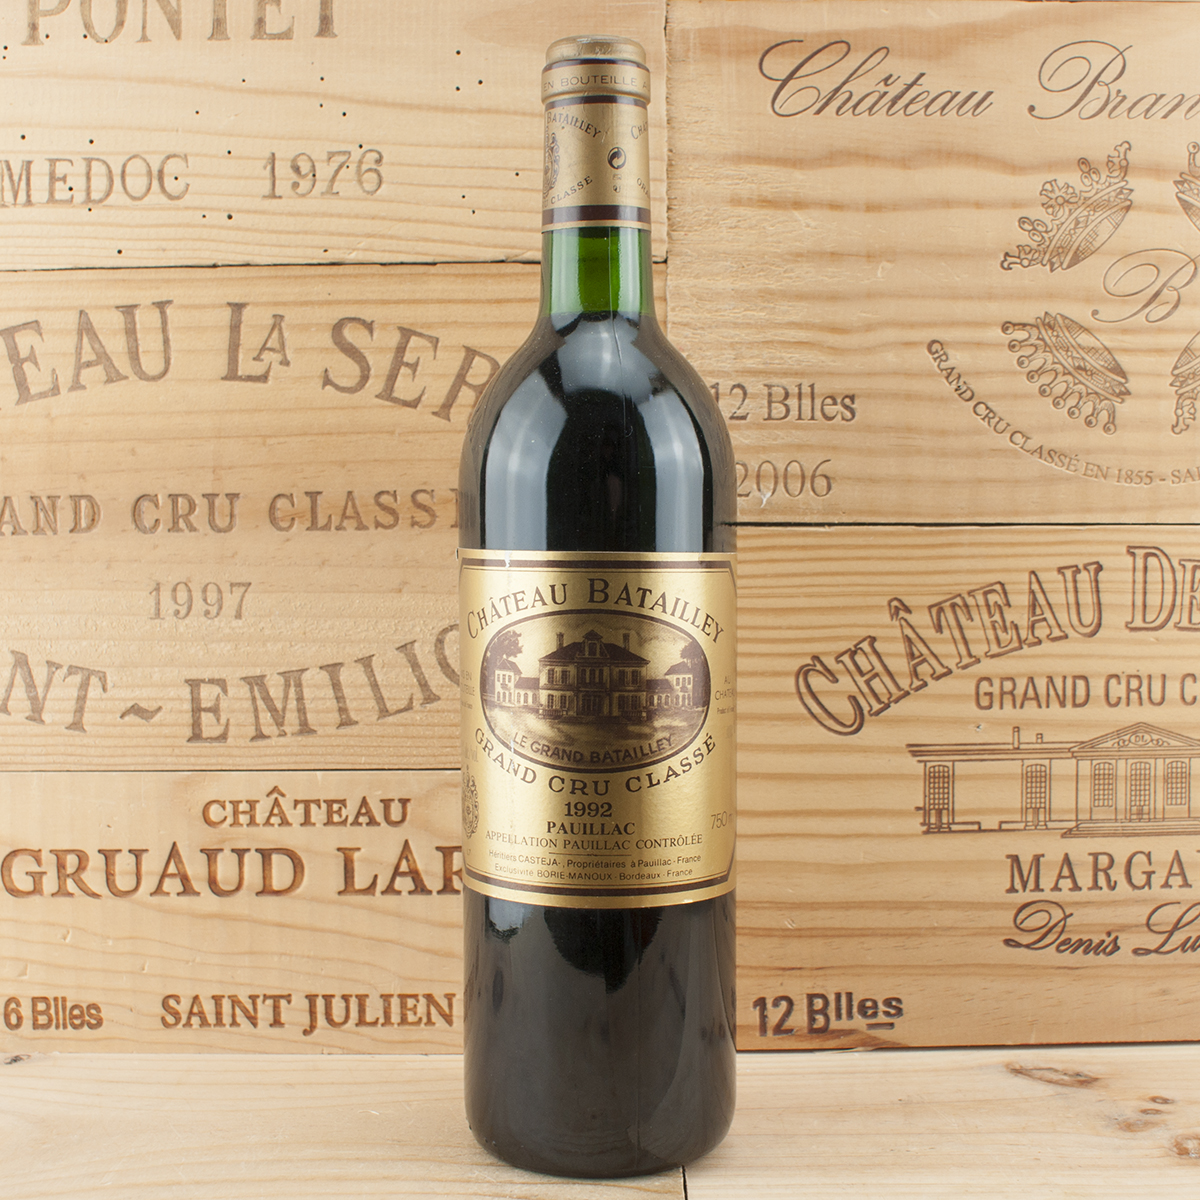 1992 Chateau Batailley